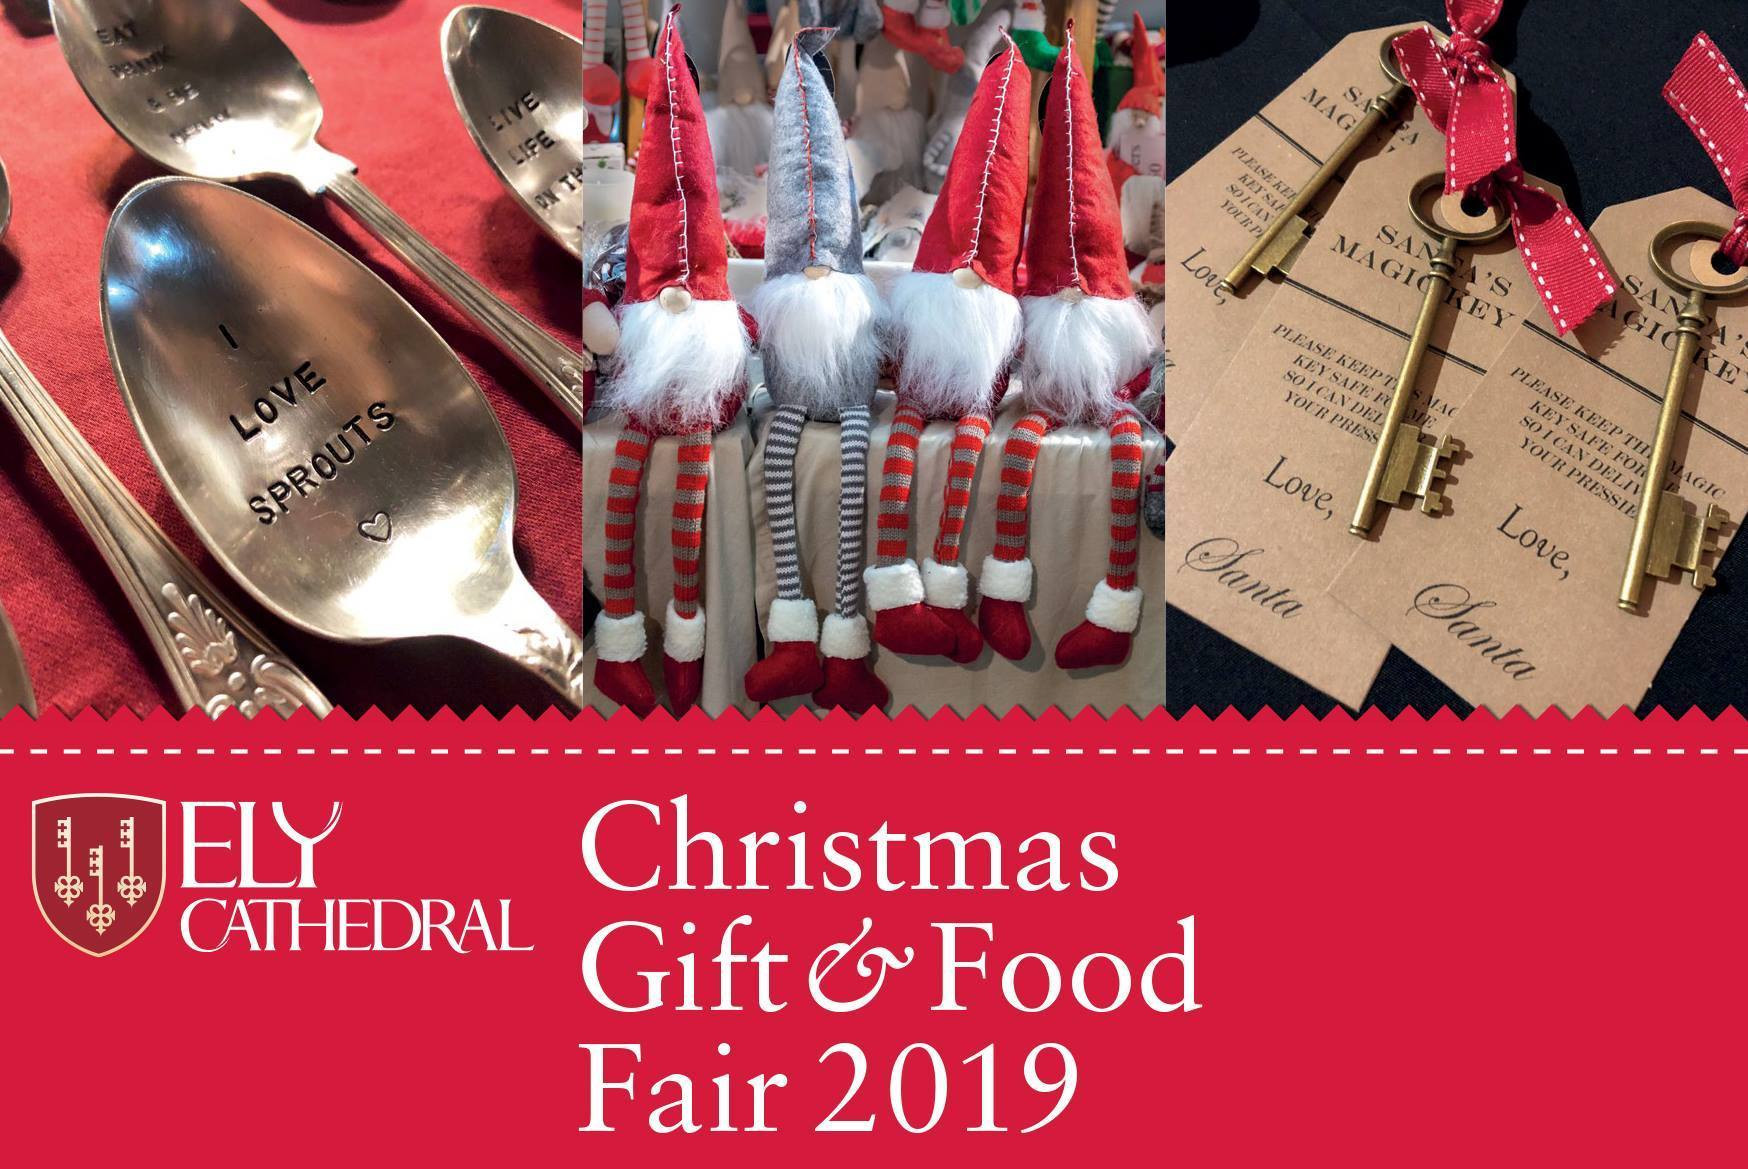 Christmas Food Gifts 2019
 Ely Cathedral Christmas Gift & Food Fair Spotted in Ely